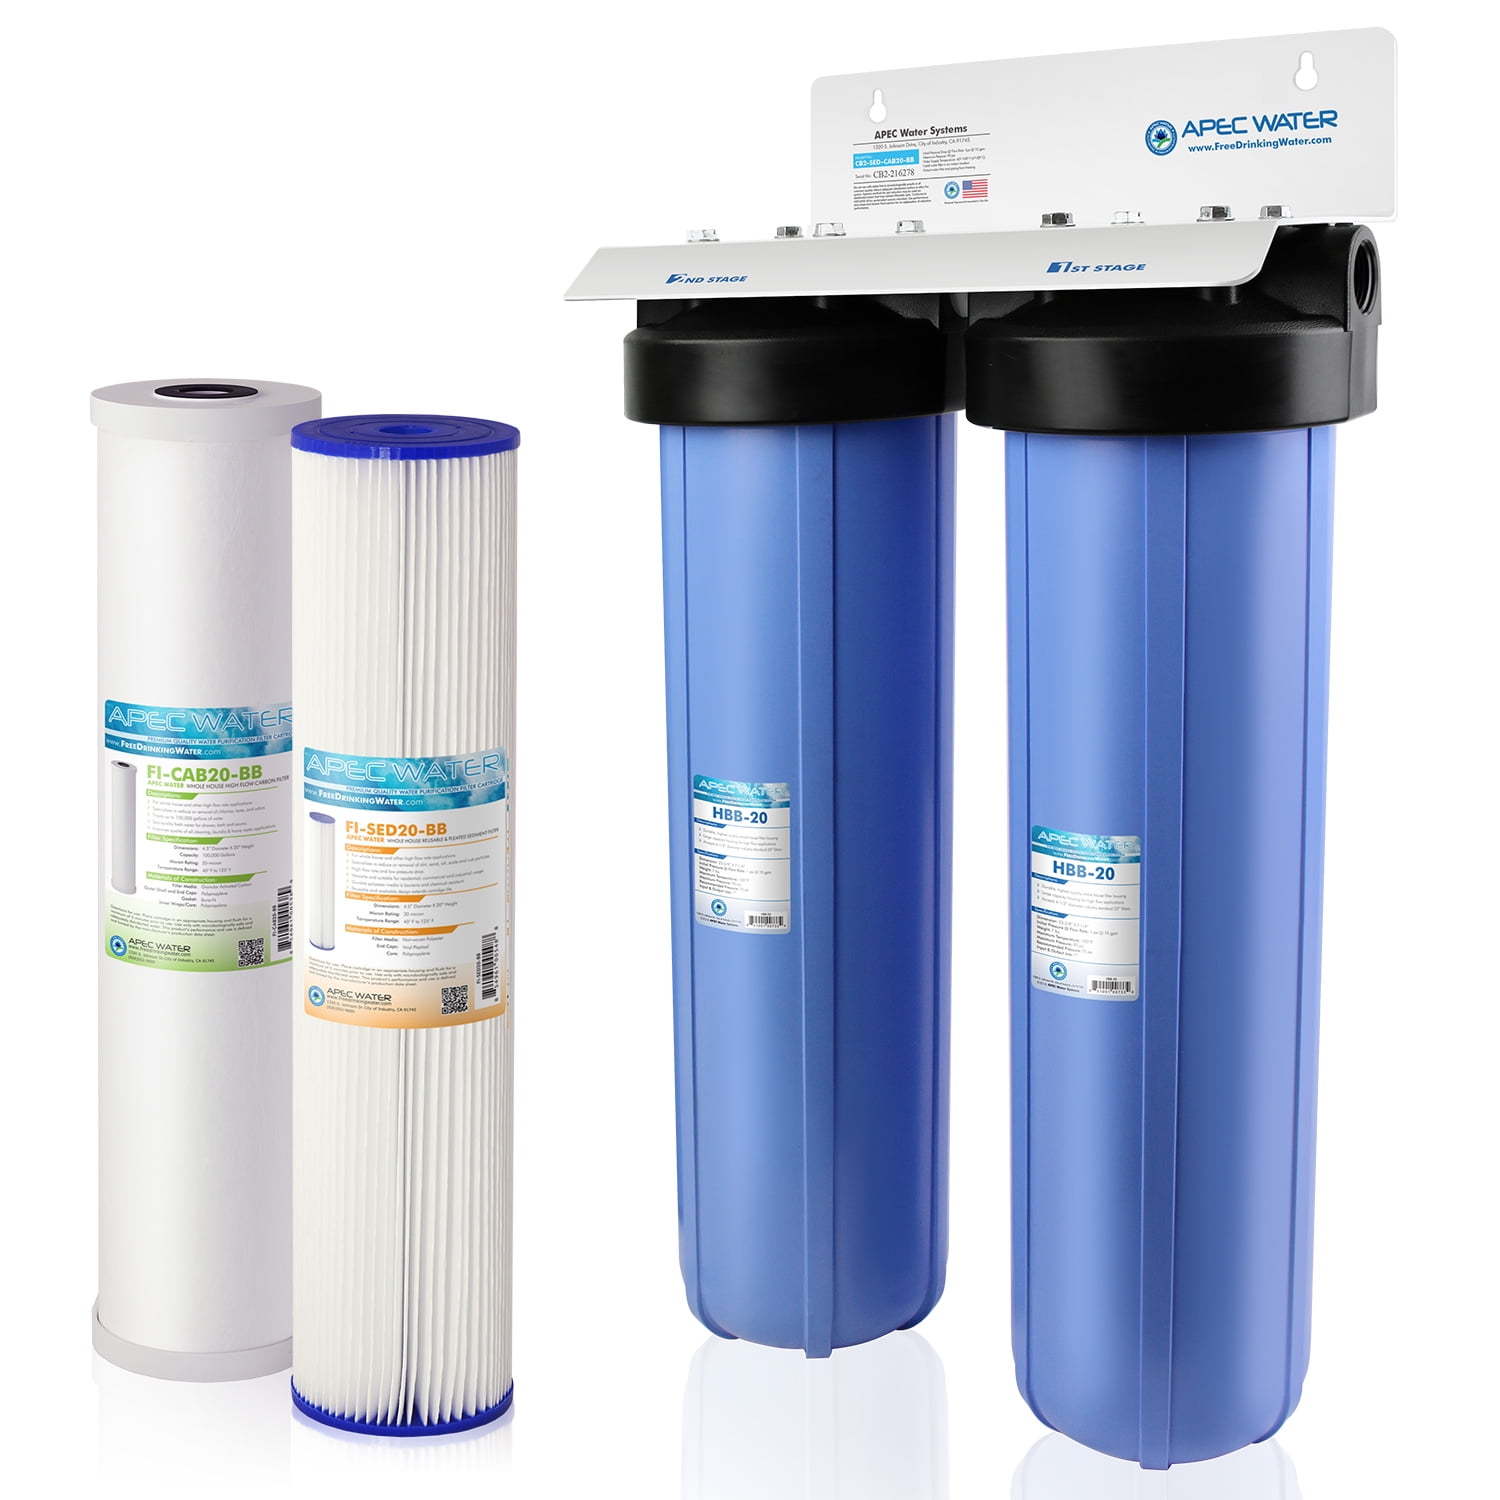 2 Transparent Big Blue Housings 20" for Whole House Water Filtration System. 